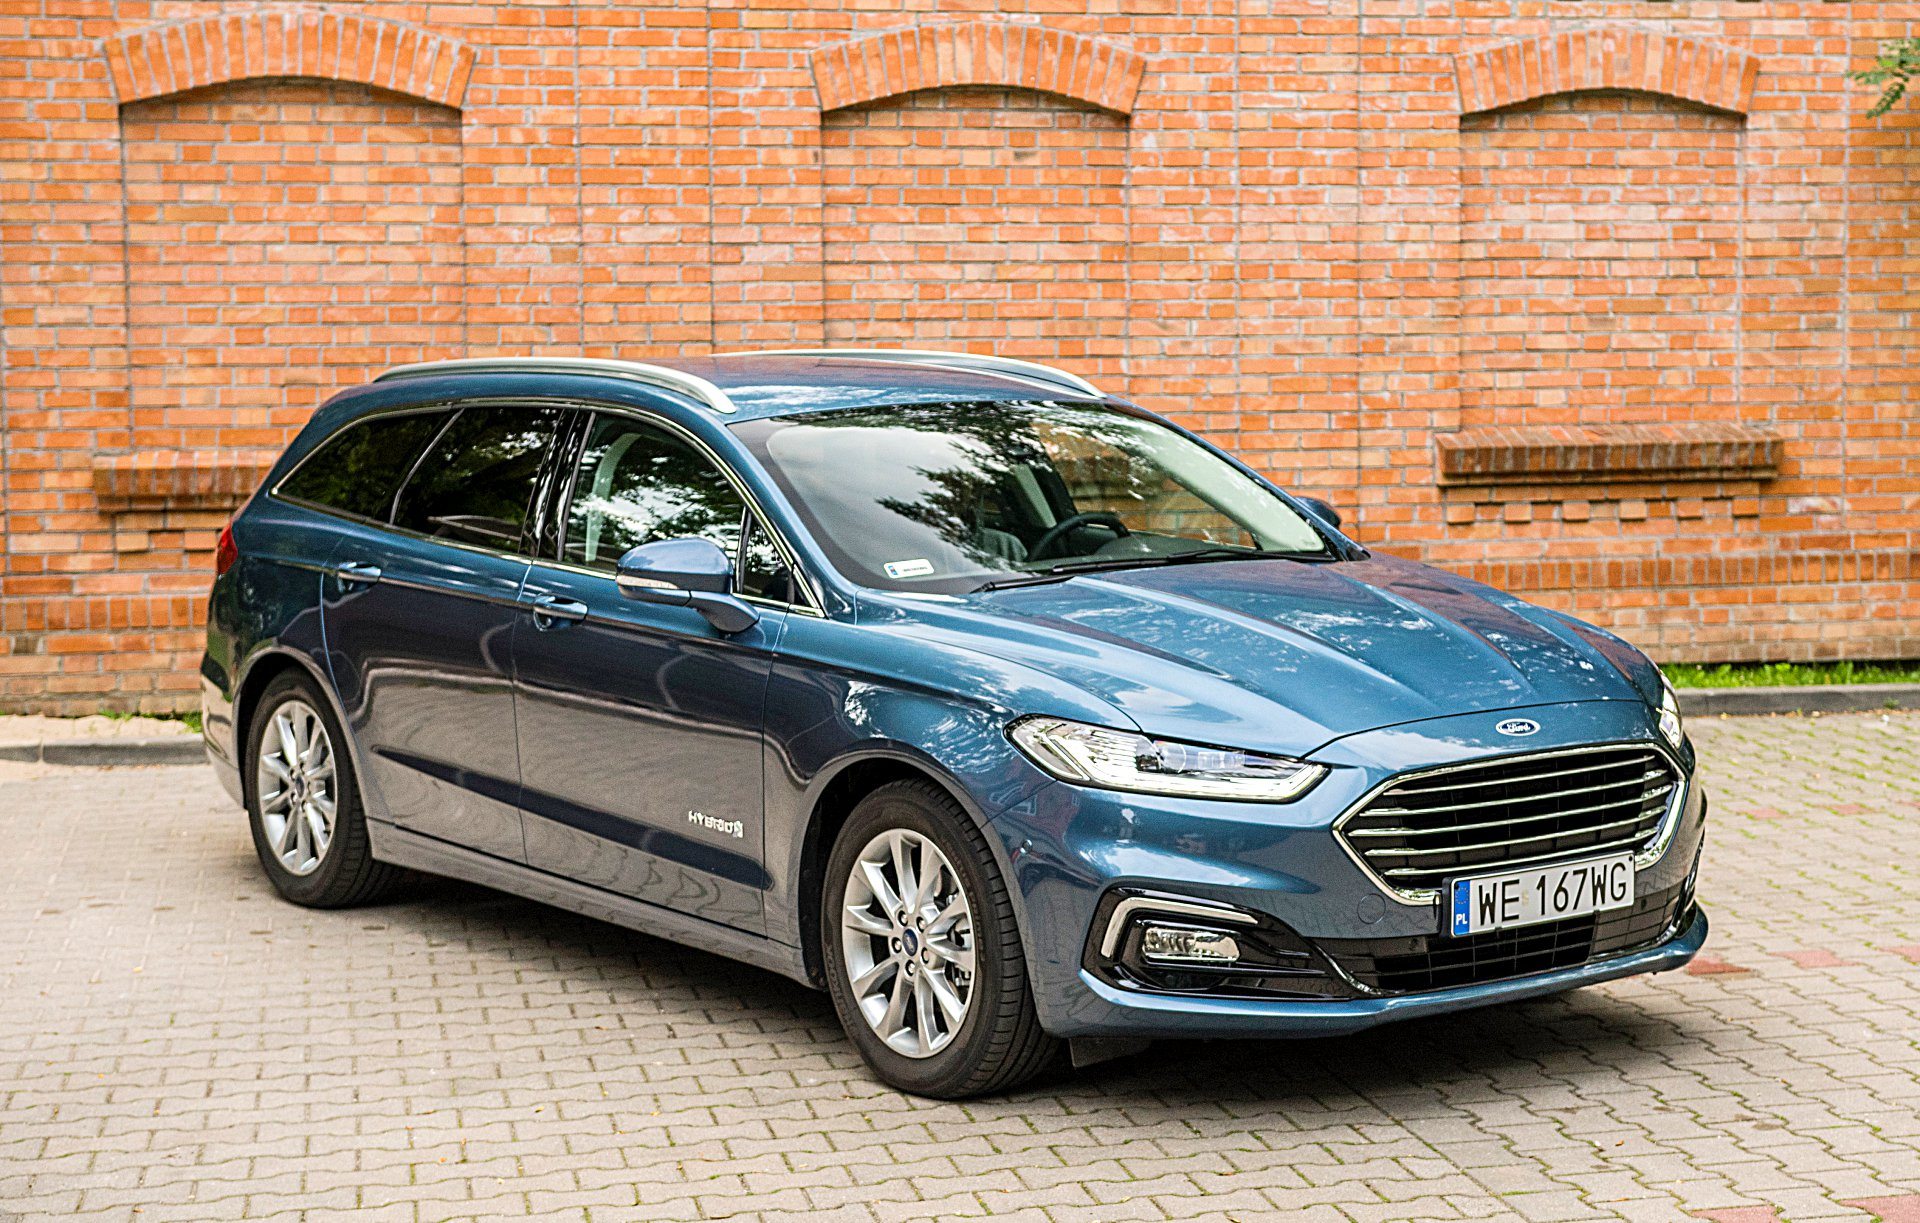 Ford Mondeo Kombi 2019 Free Supercar Picture HD